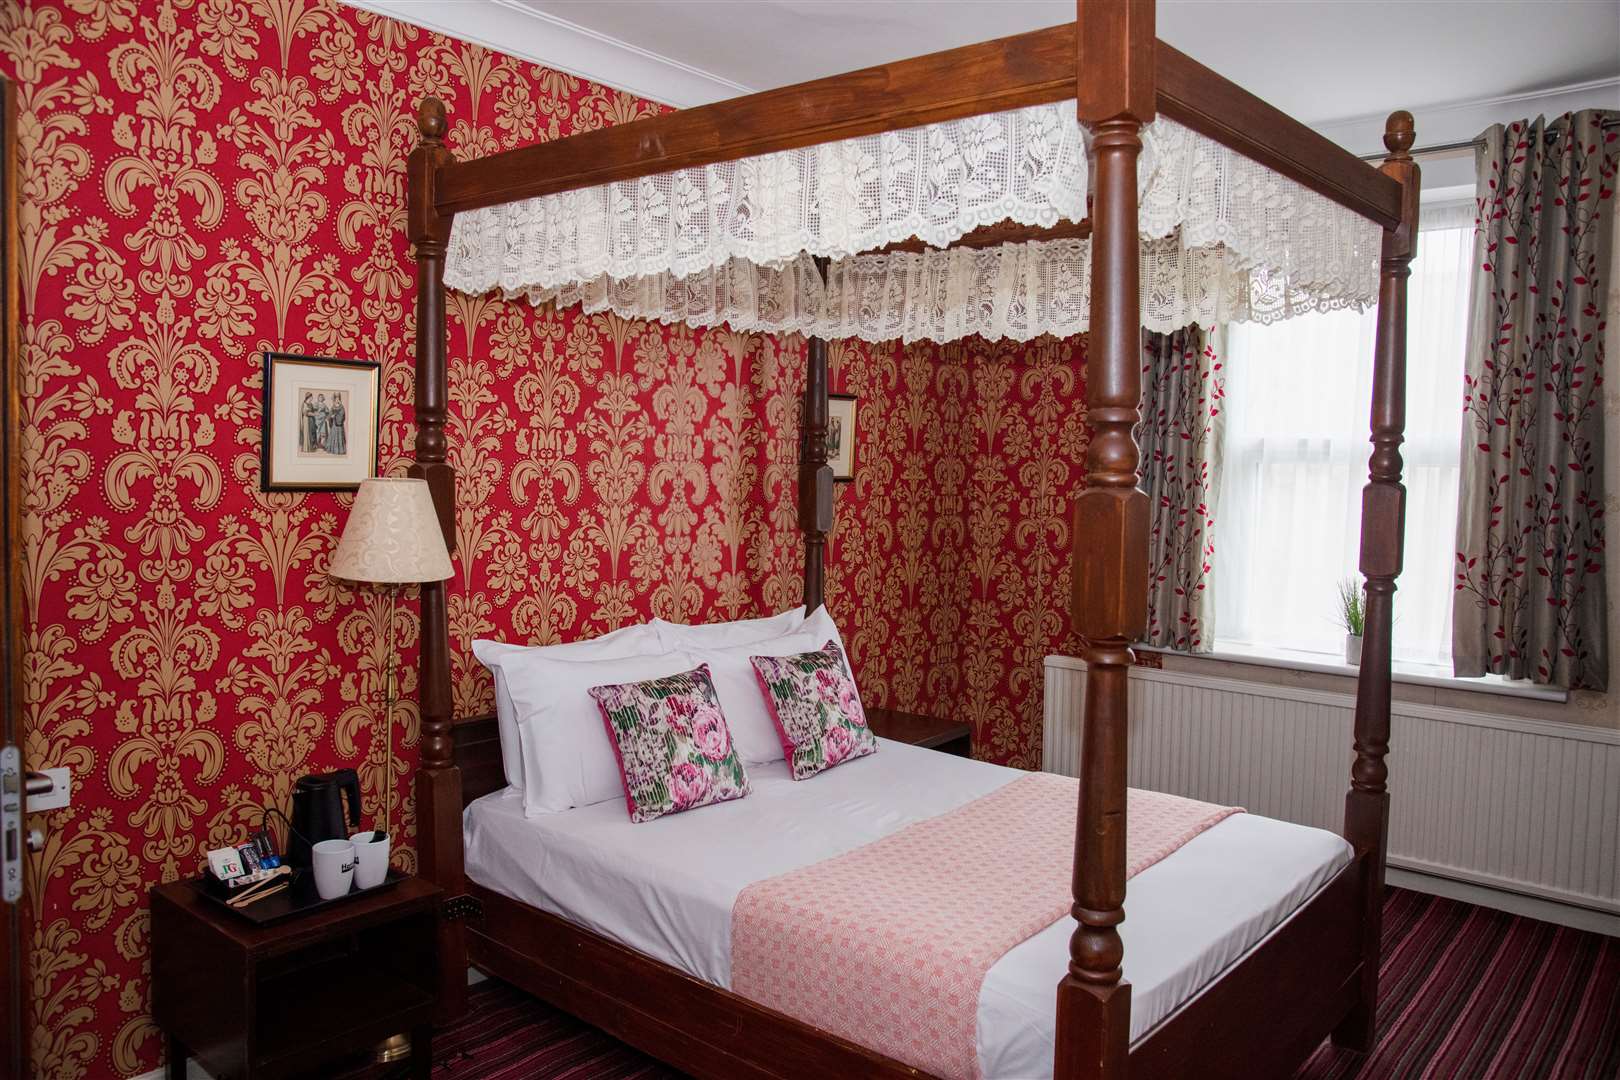 Prices start from £77 per night. Picture: Robert Leech/One To One Photography